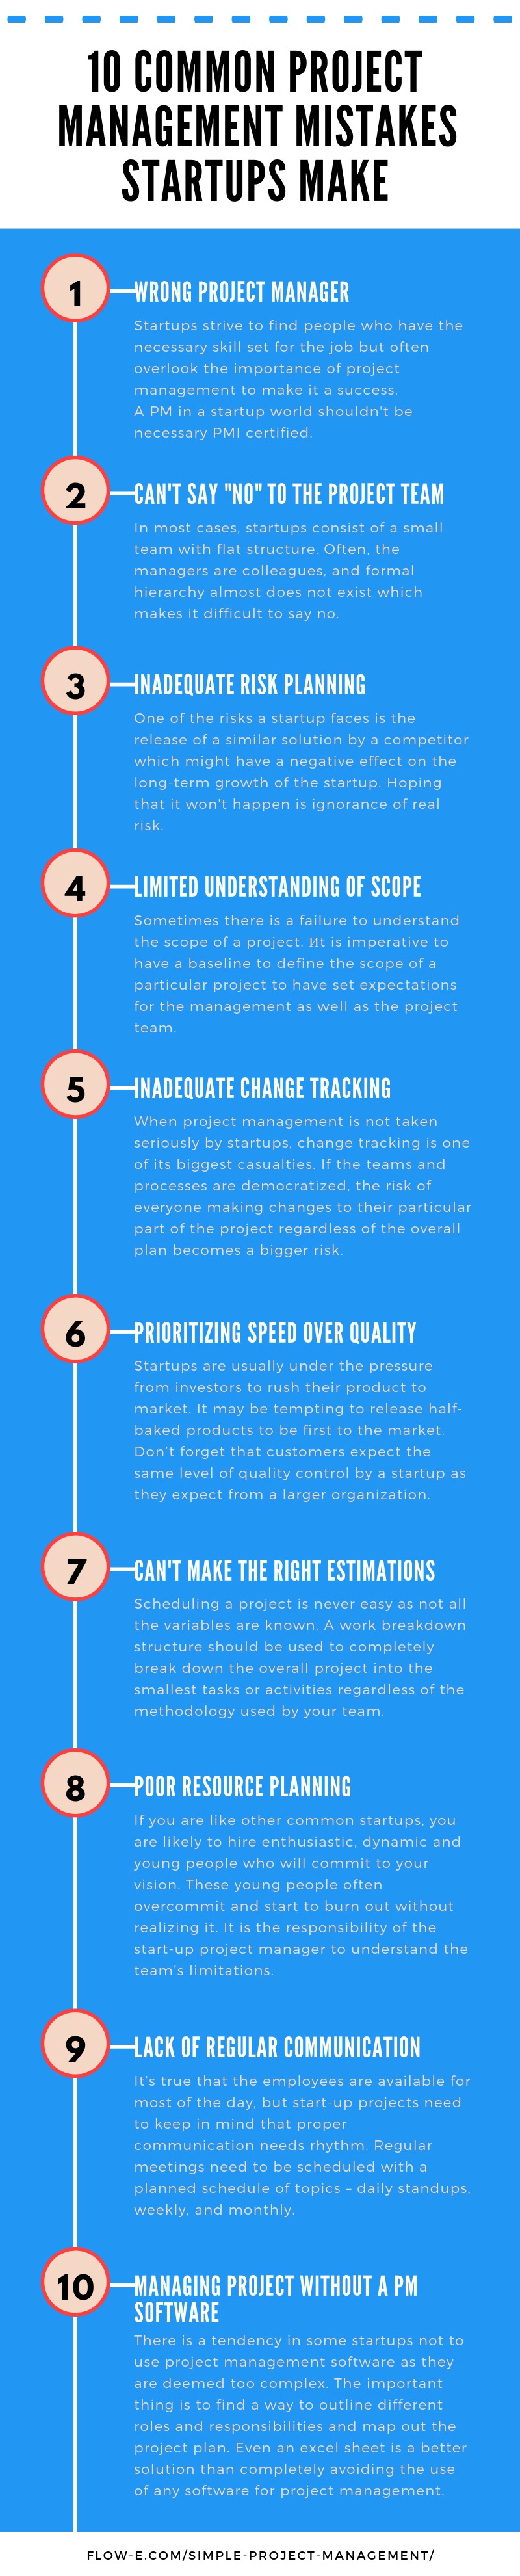 10 Most Common Project Management Mistakes Startups Make аnd Their Solutions